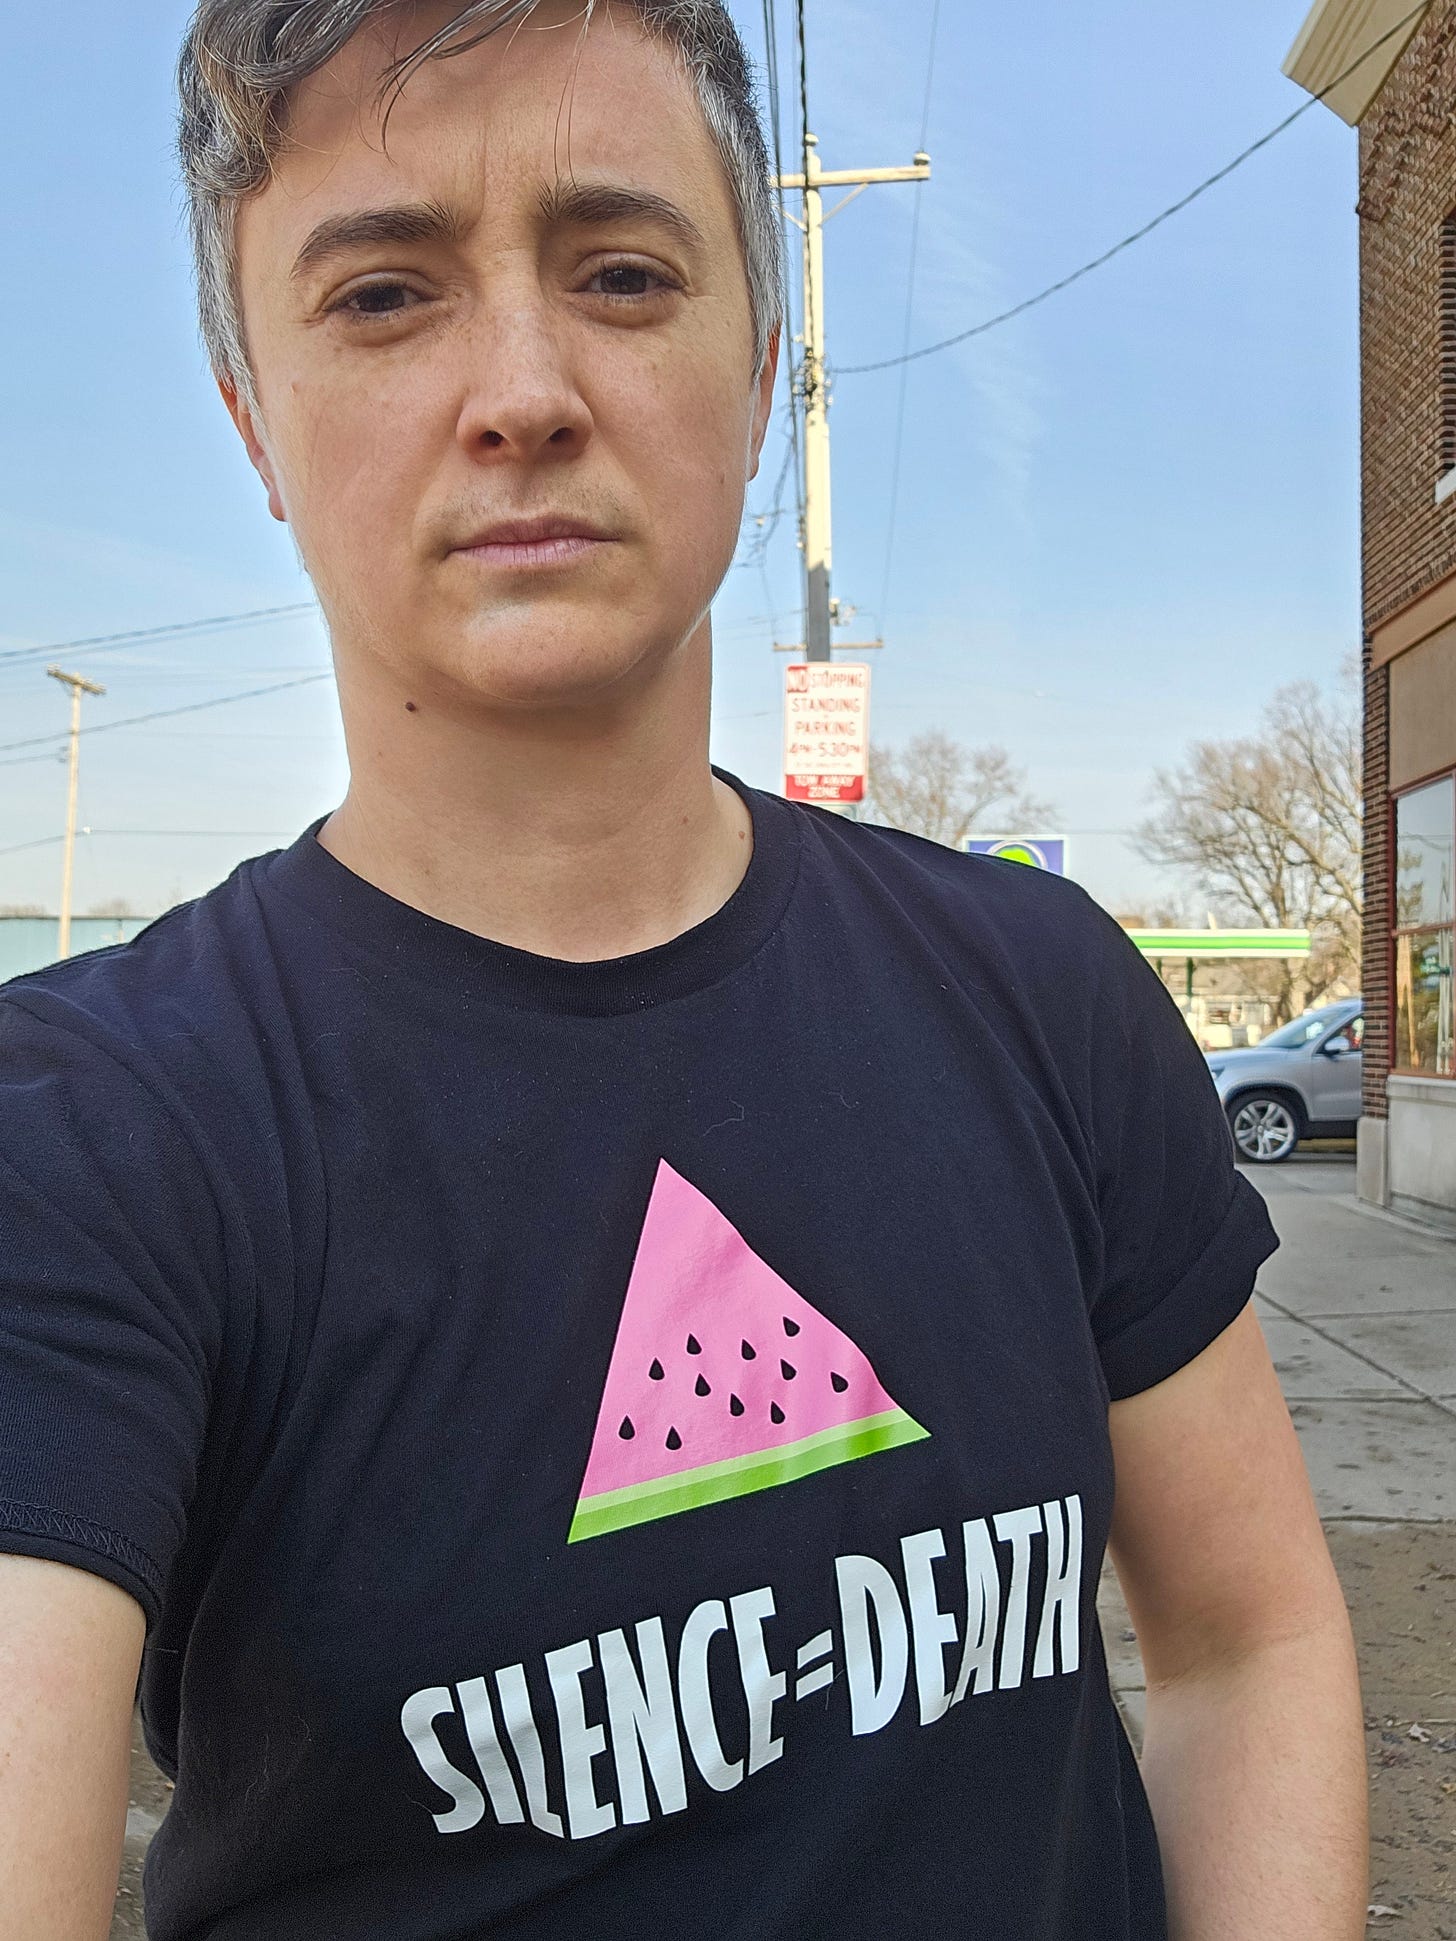 Emily looking into the camera, looking solemn, wears a black t-shirt with the image of a watermelon slice in the shape of the traditional gay pink triangle, and the words "Silence = Death" written below.